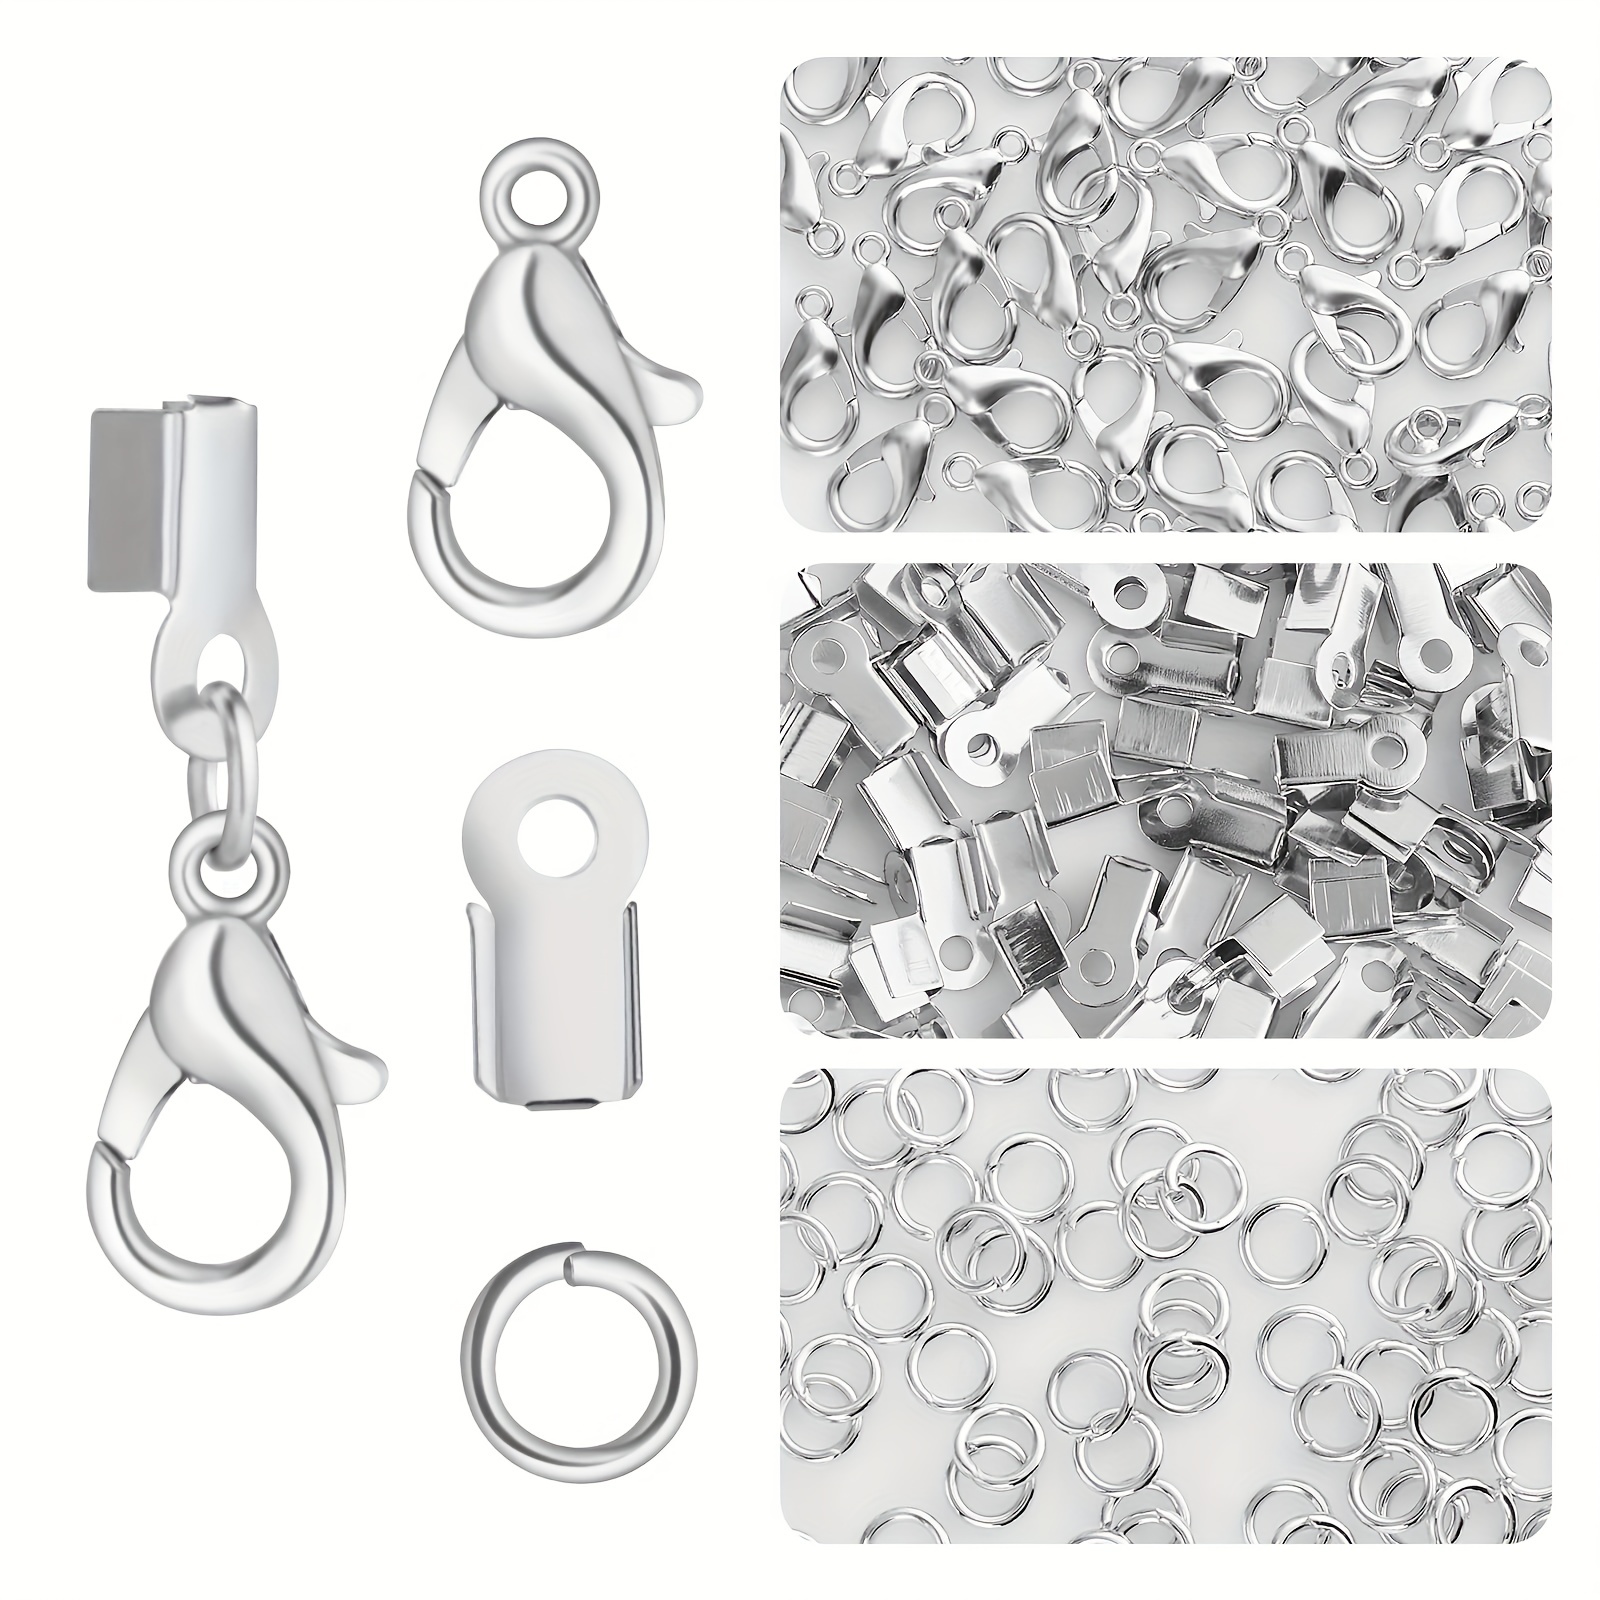 

450 Piece Jewelry Making Accessories Kit Include 200 Fold Over Cord End Caps Crimp End Tips 200 Jump Ring Connectors And 50 Lobster Claw Clasps For Jewelry Making And Repairing